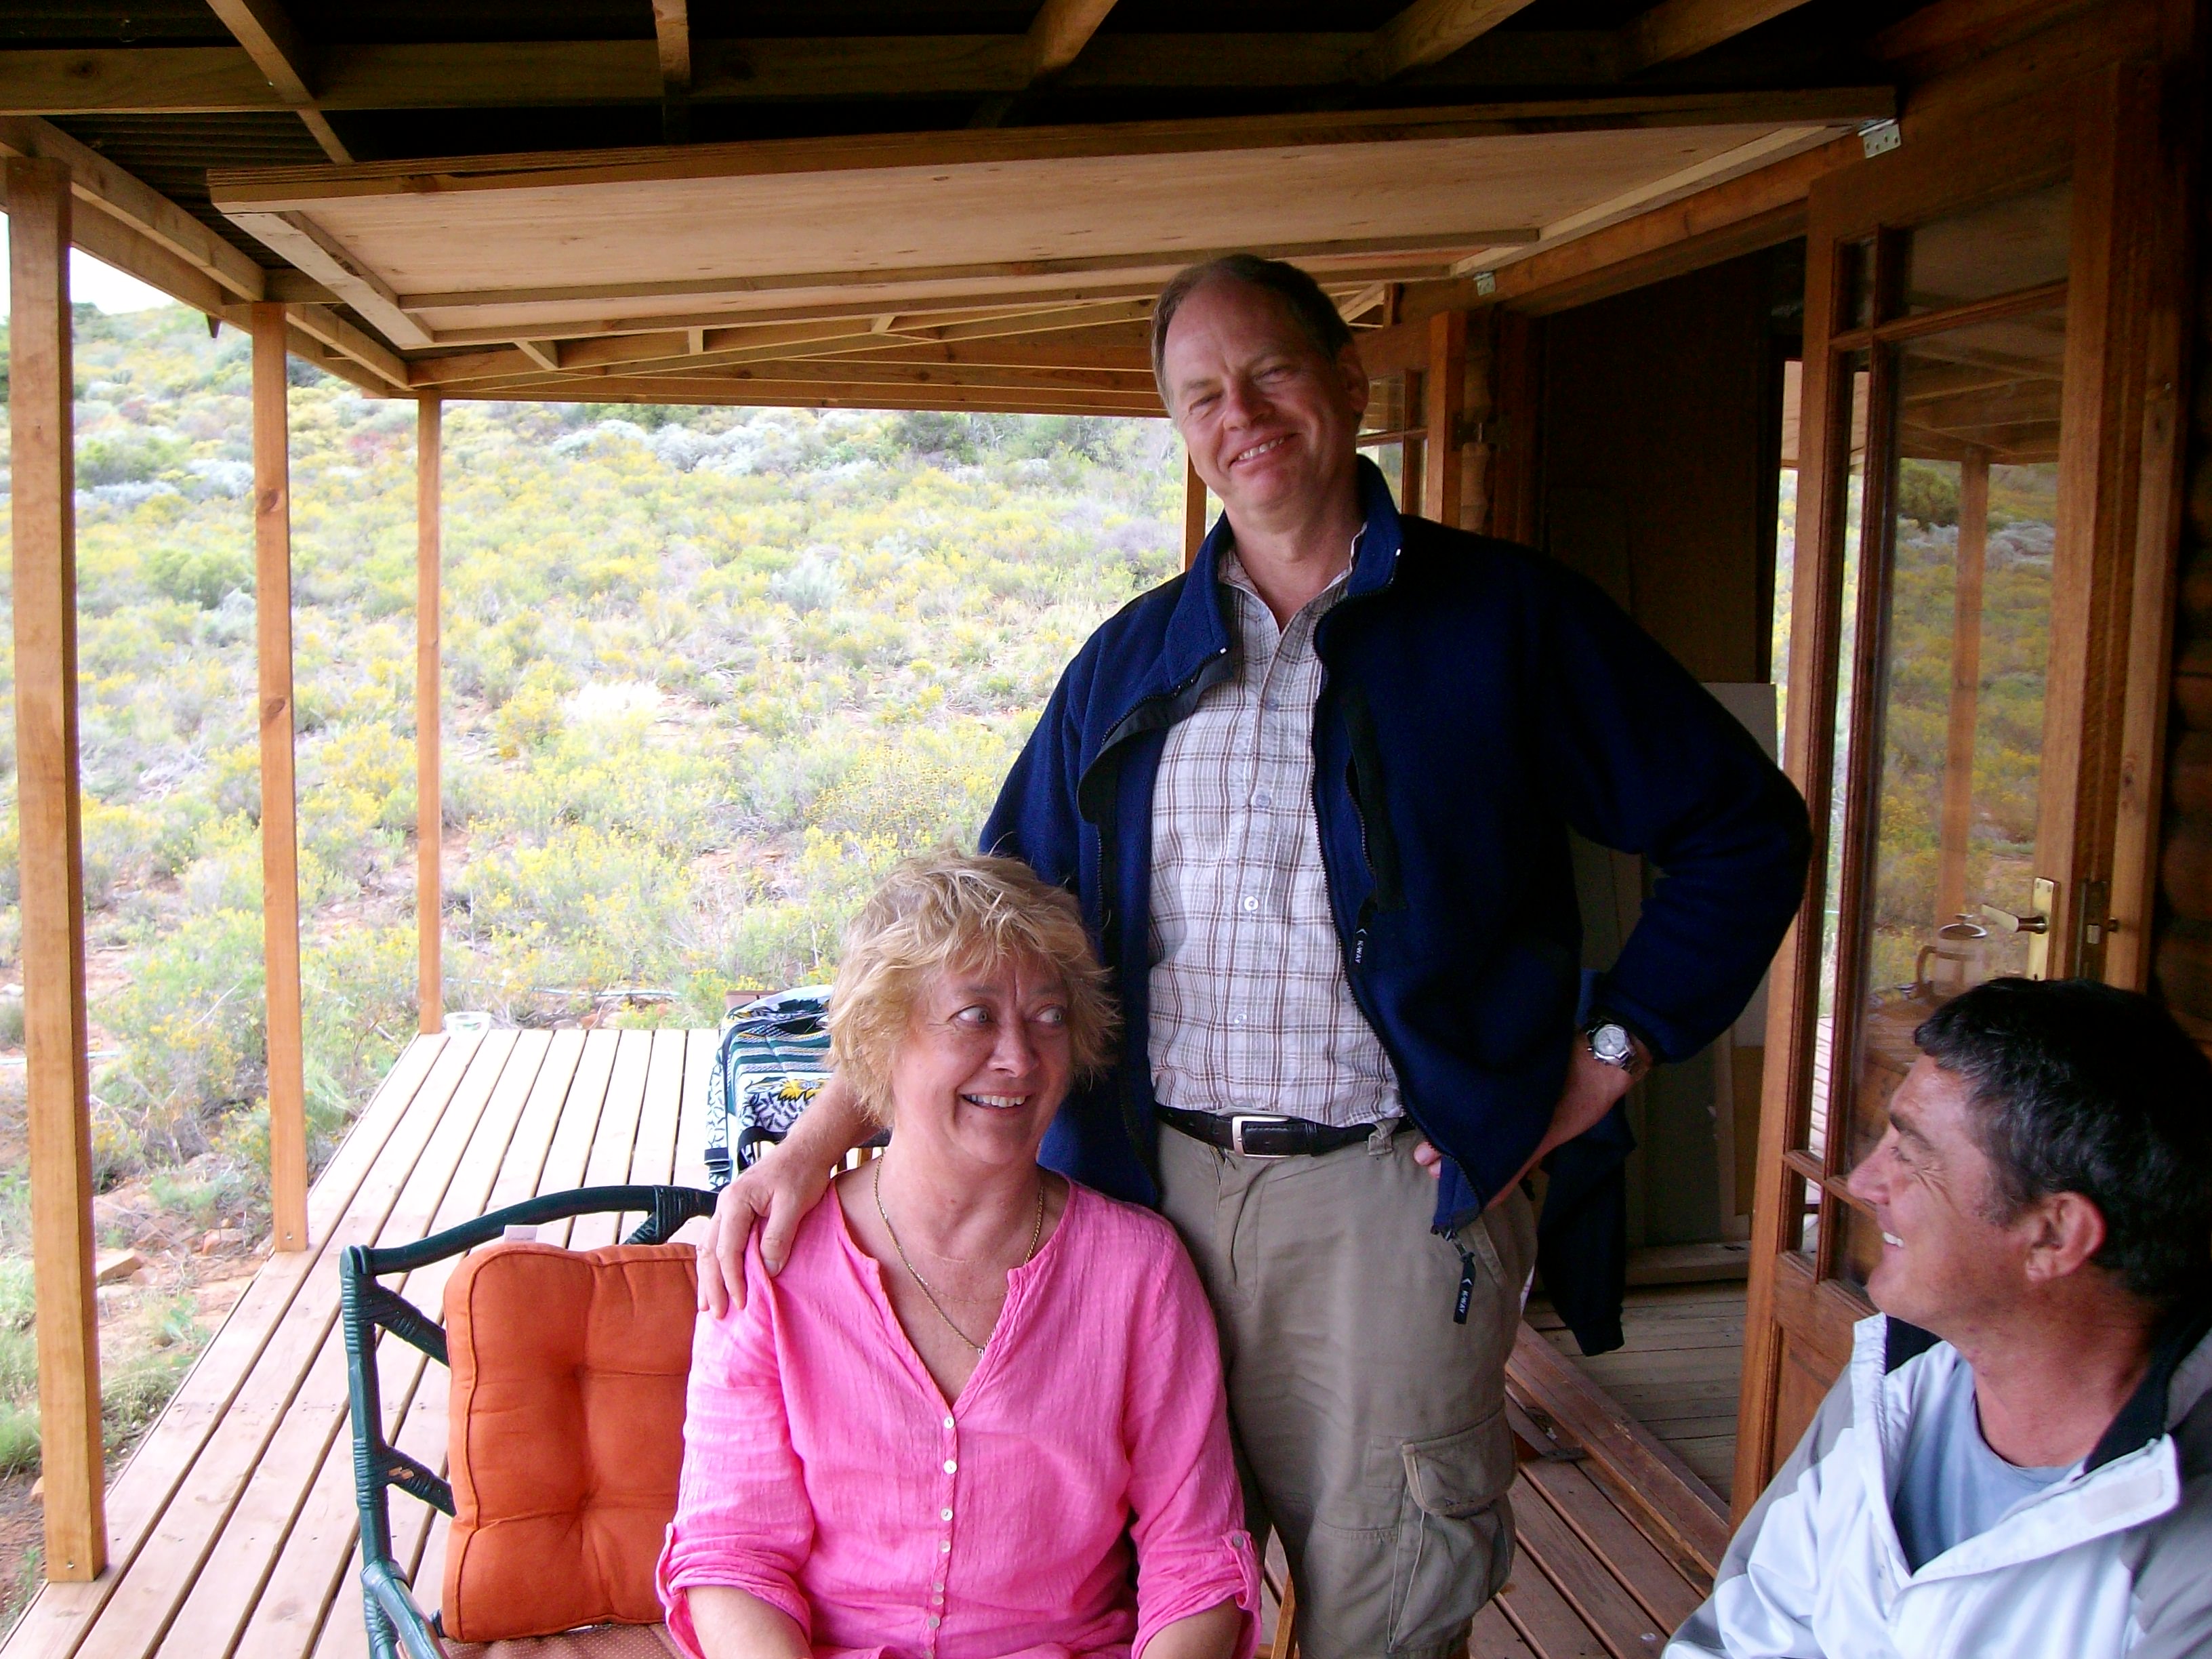 Sewell with his wife at their log cabin.